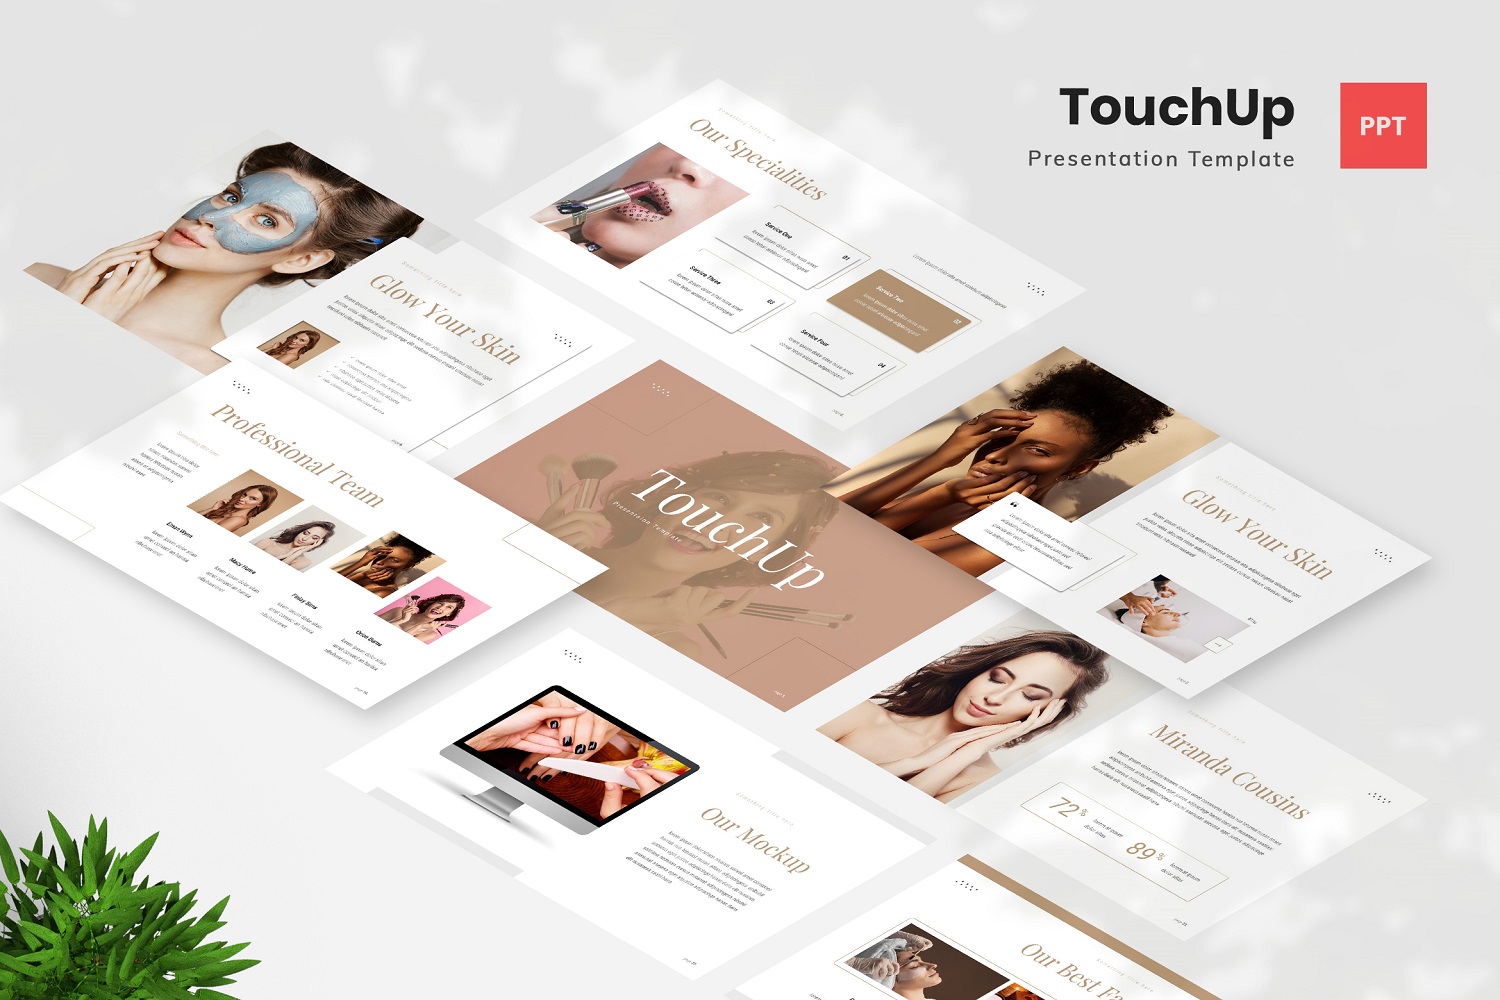 TouchUp - Beauty Care PowerPoint Template